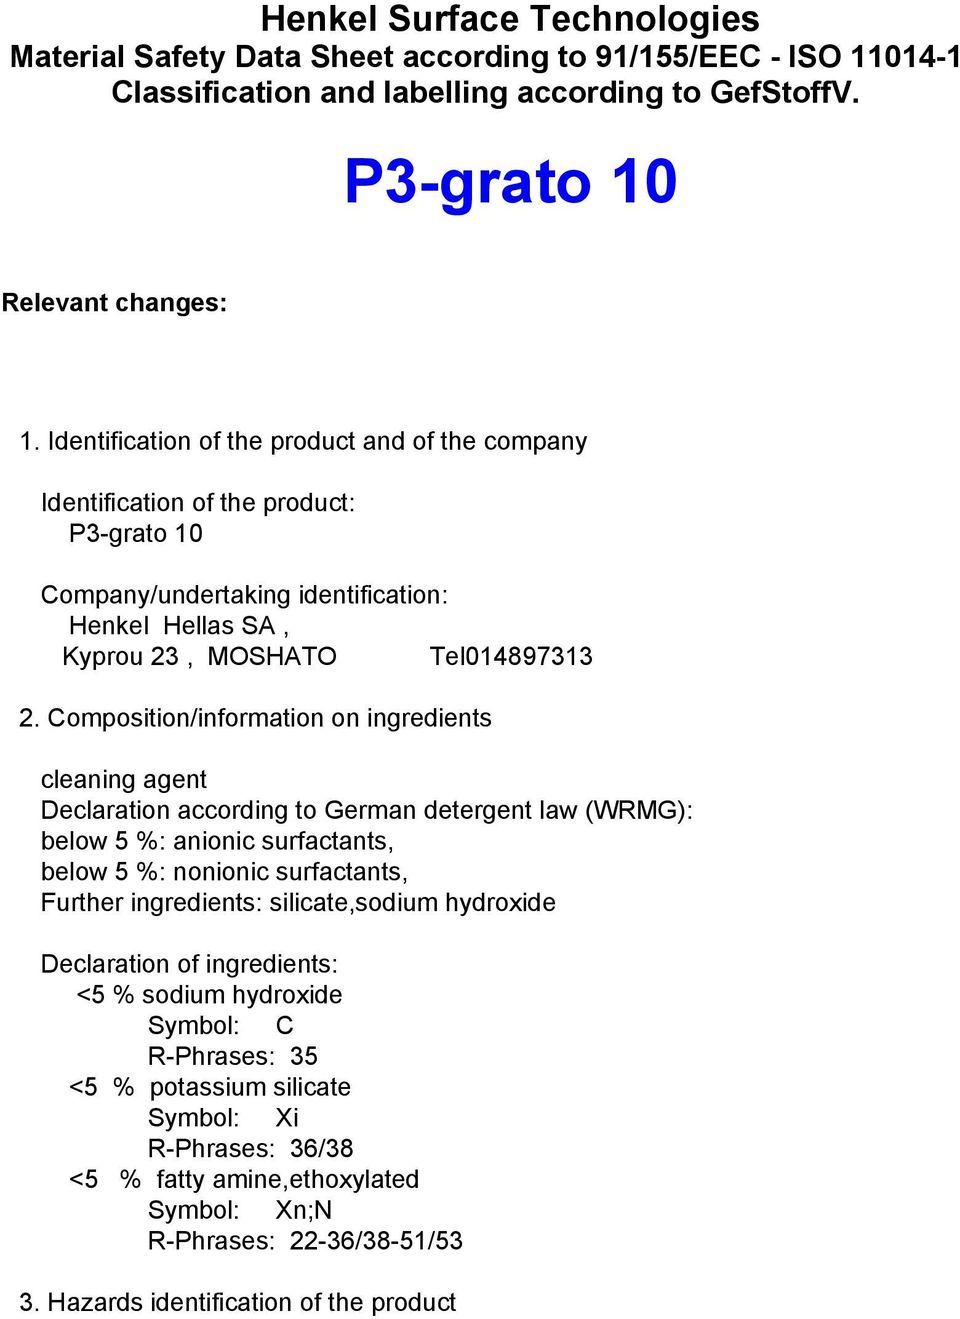 Composition/information on ingredients cleaning agent Declaration according to German detergent law (WRMG): below 5 %: anionic surfactants, below 5 %: nonionic surfactants, Further ingredients: